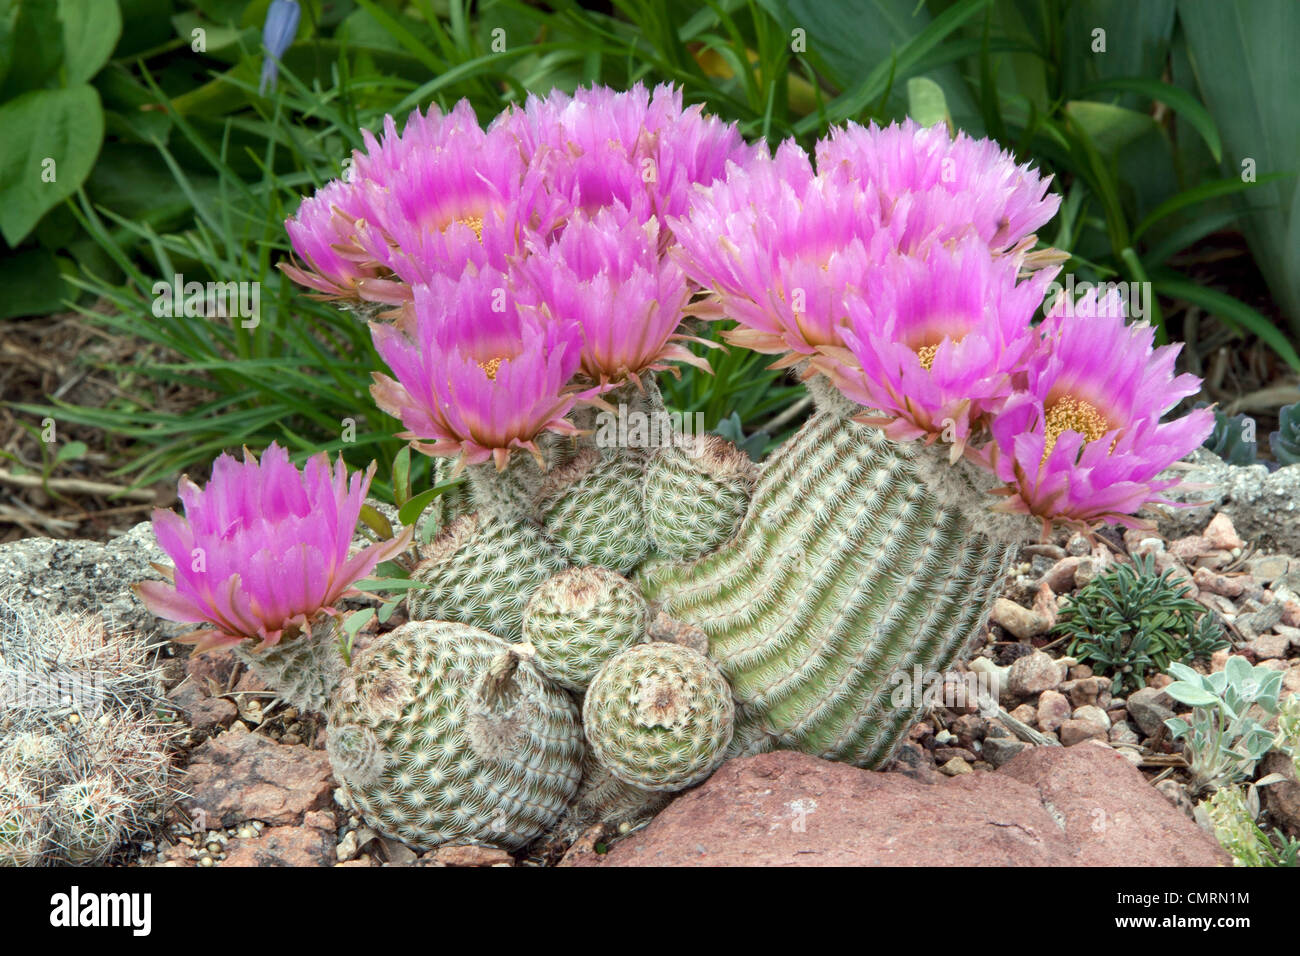 Lace Hedgehog Cactus in full bloom Stock Photo